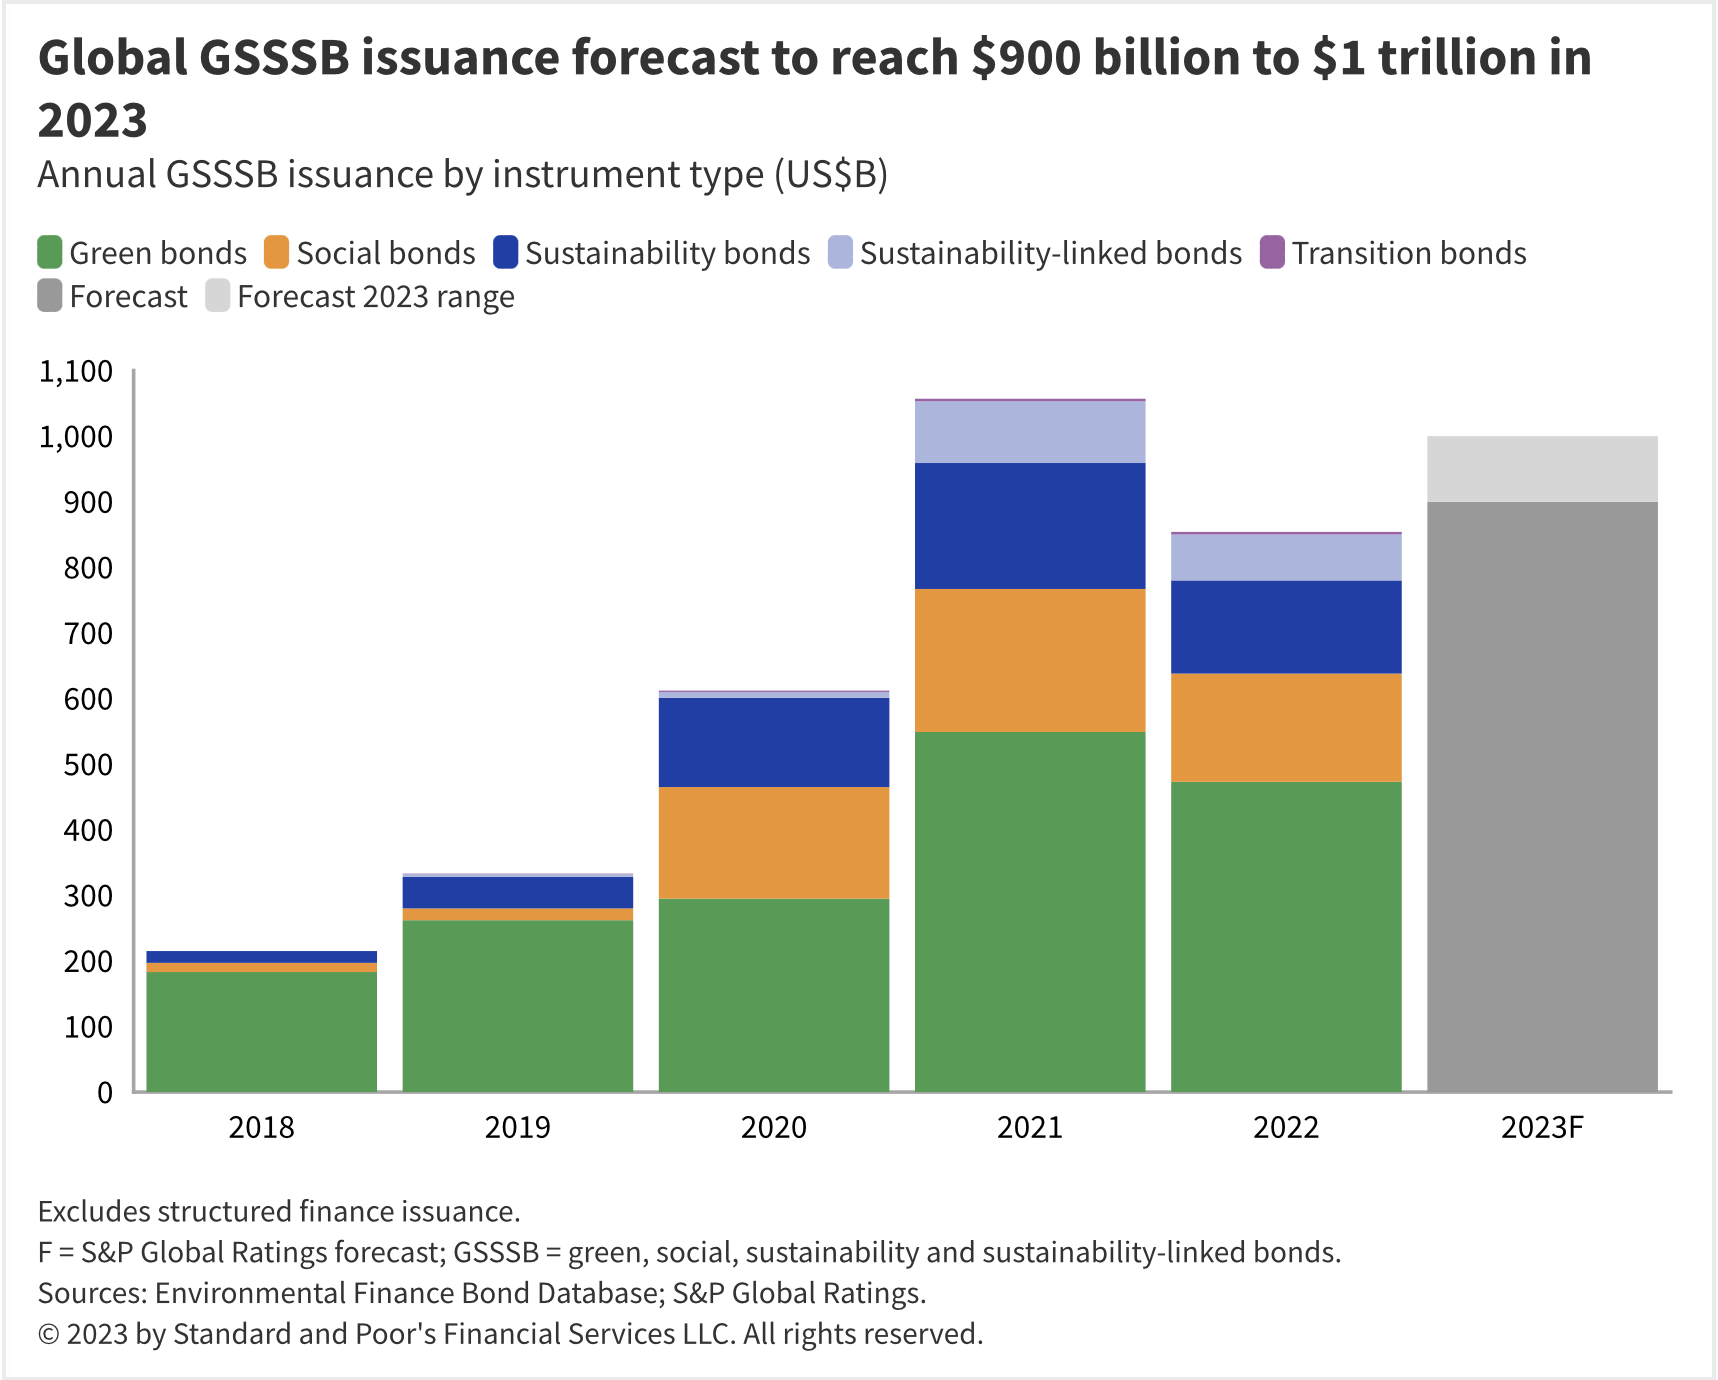 Global GSSSB issuance forecast to reach $900 billion to $1 trillion in 2023